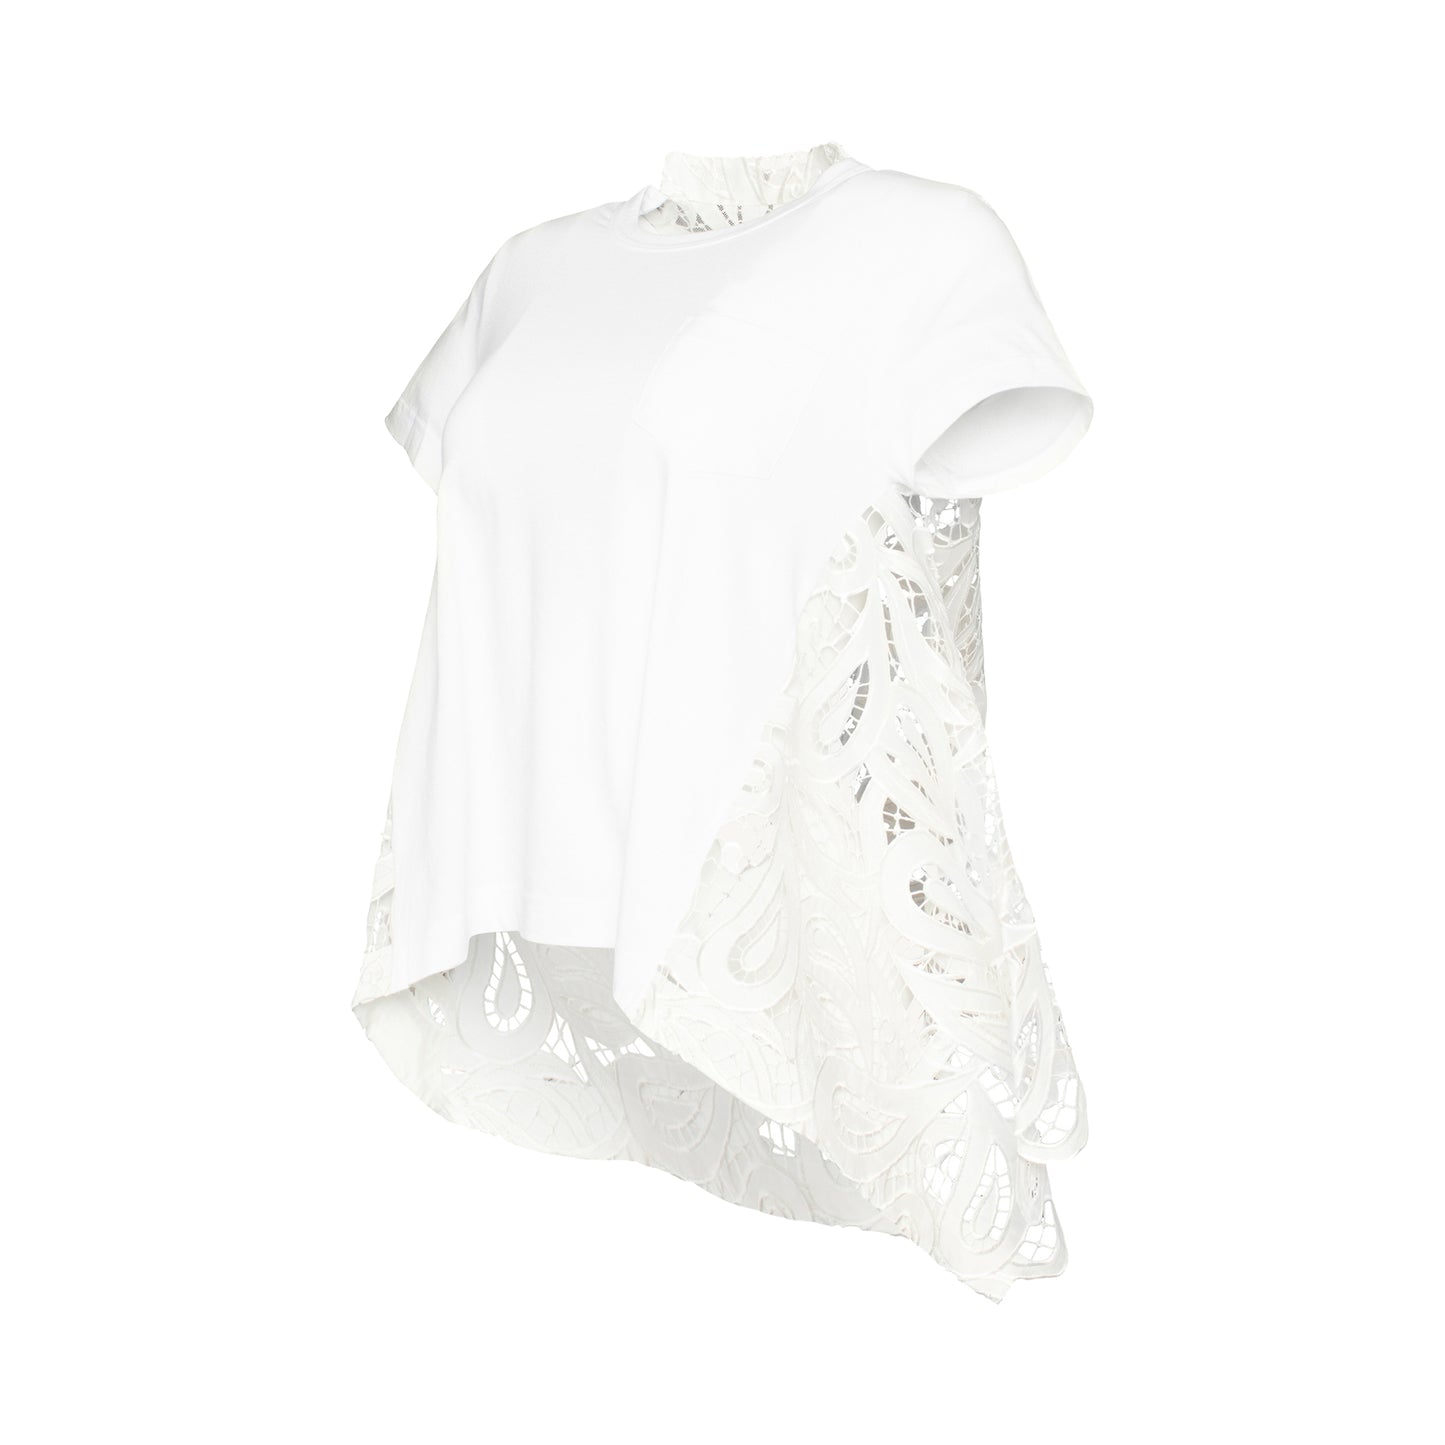 Paisley Lace T-Shirt in White